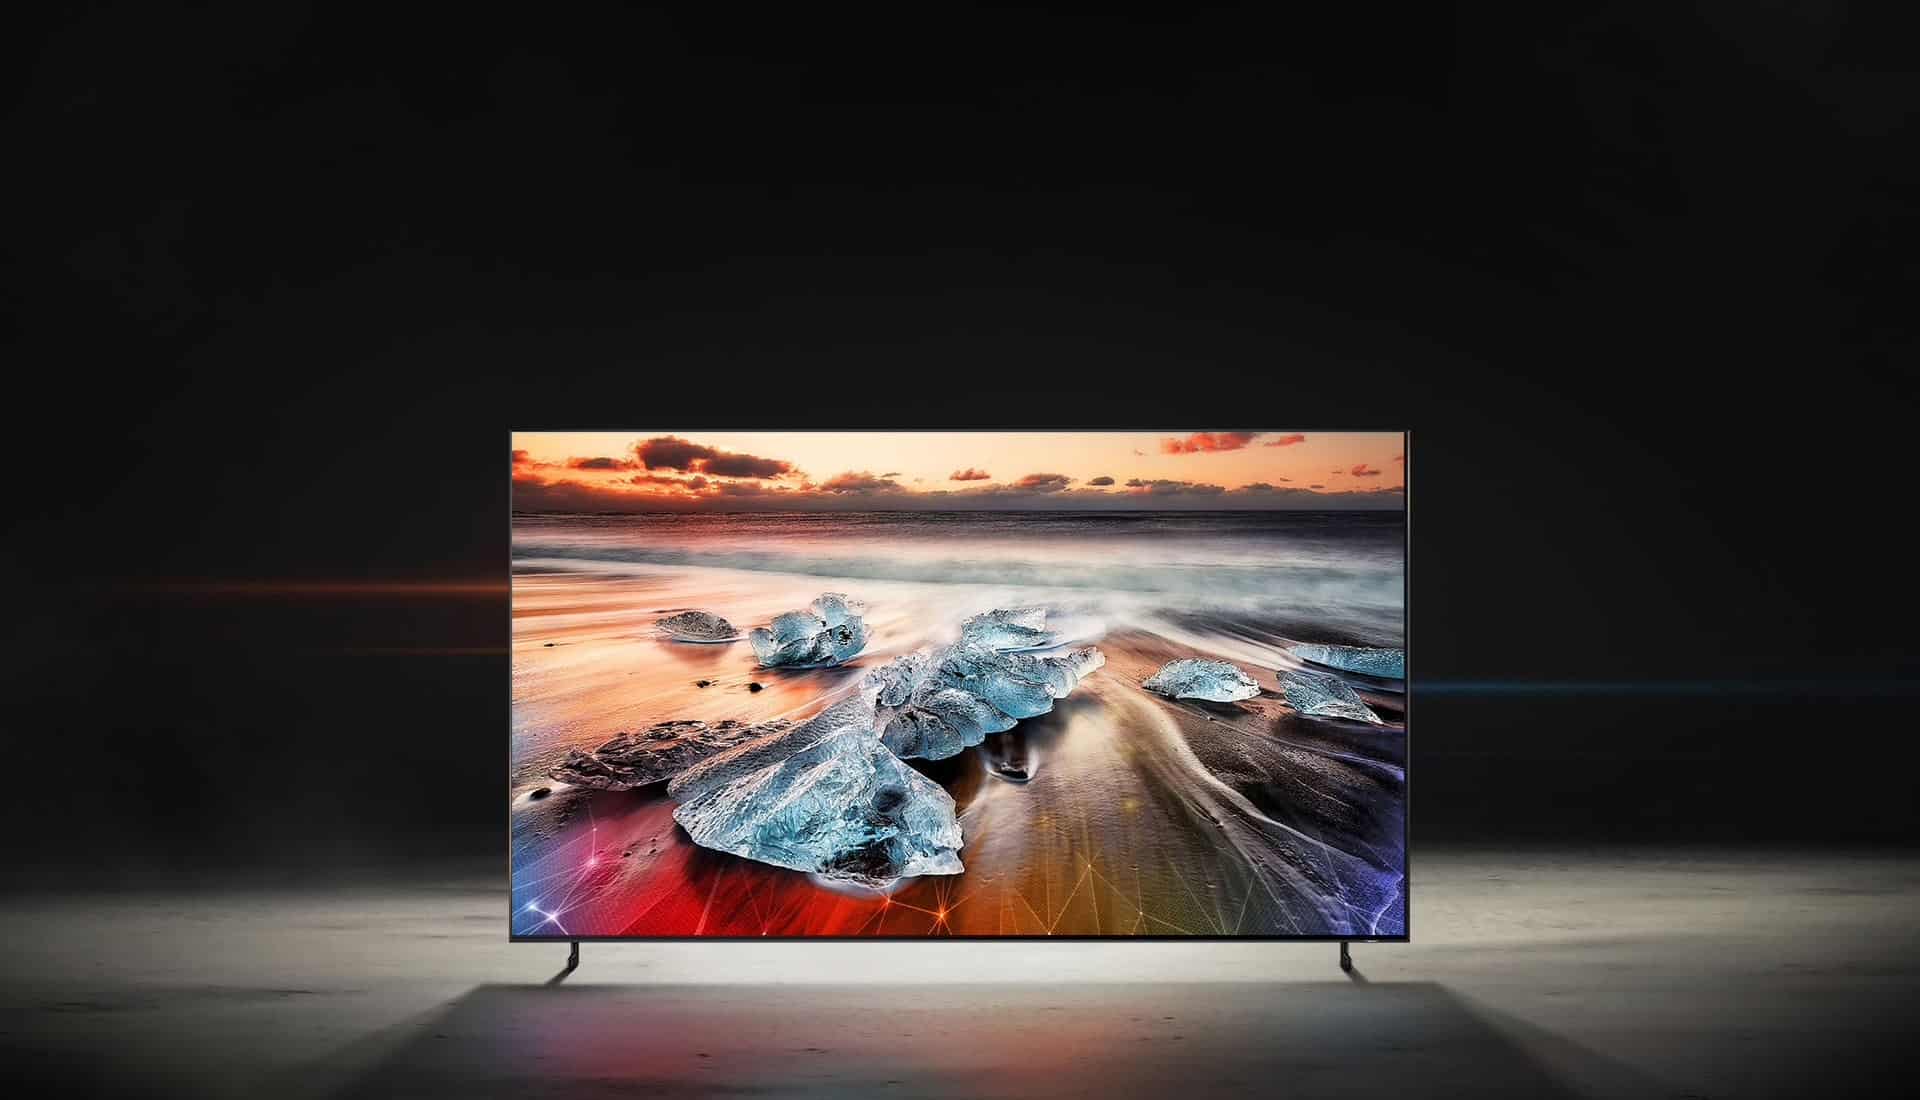 The Best 4 Flatscreen Televisions Worth Purchasing This Year